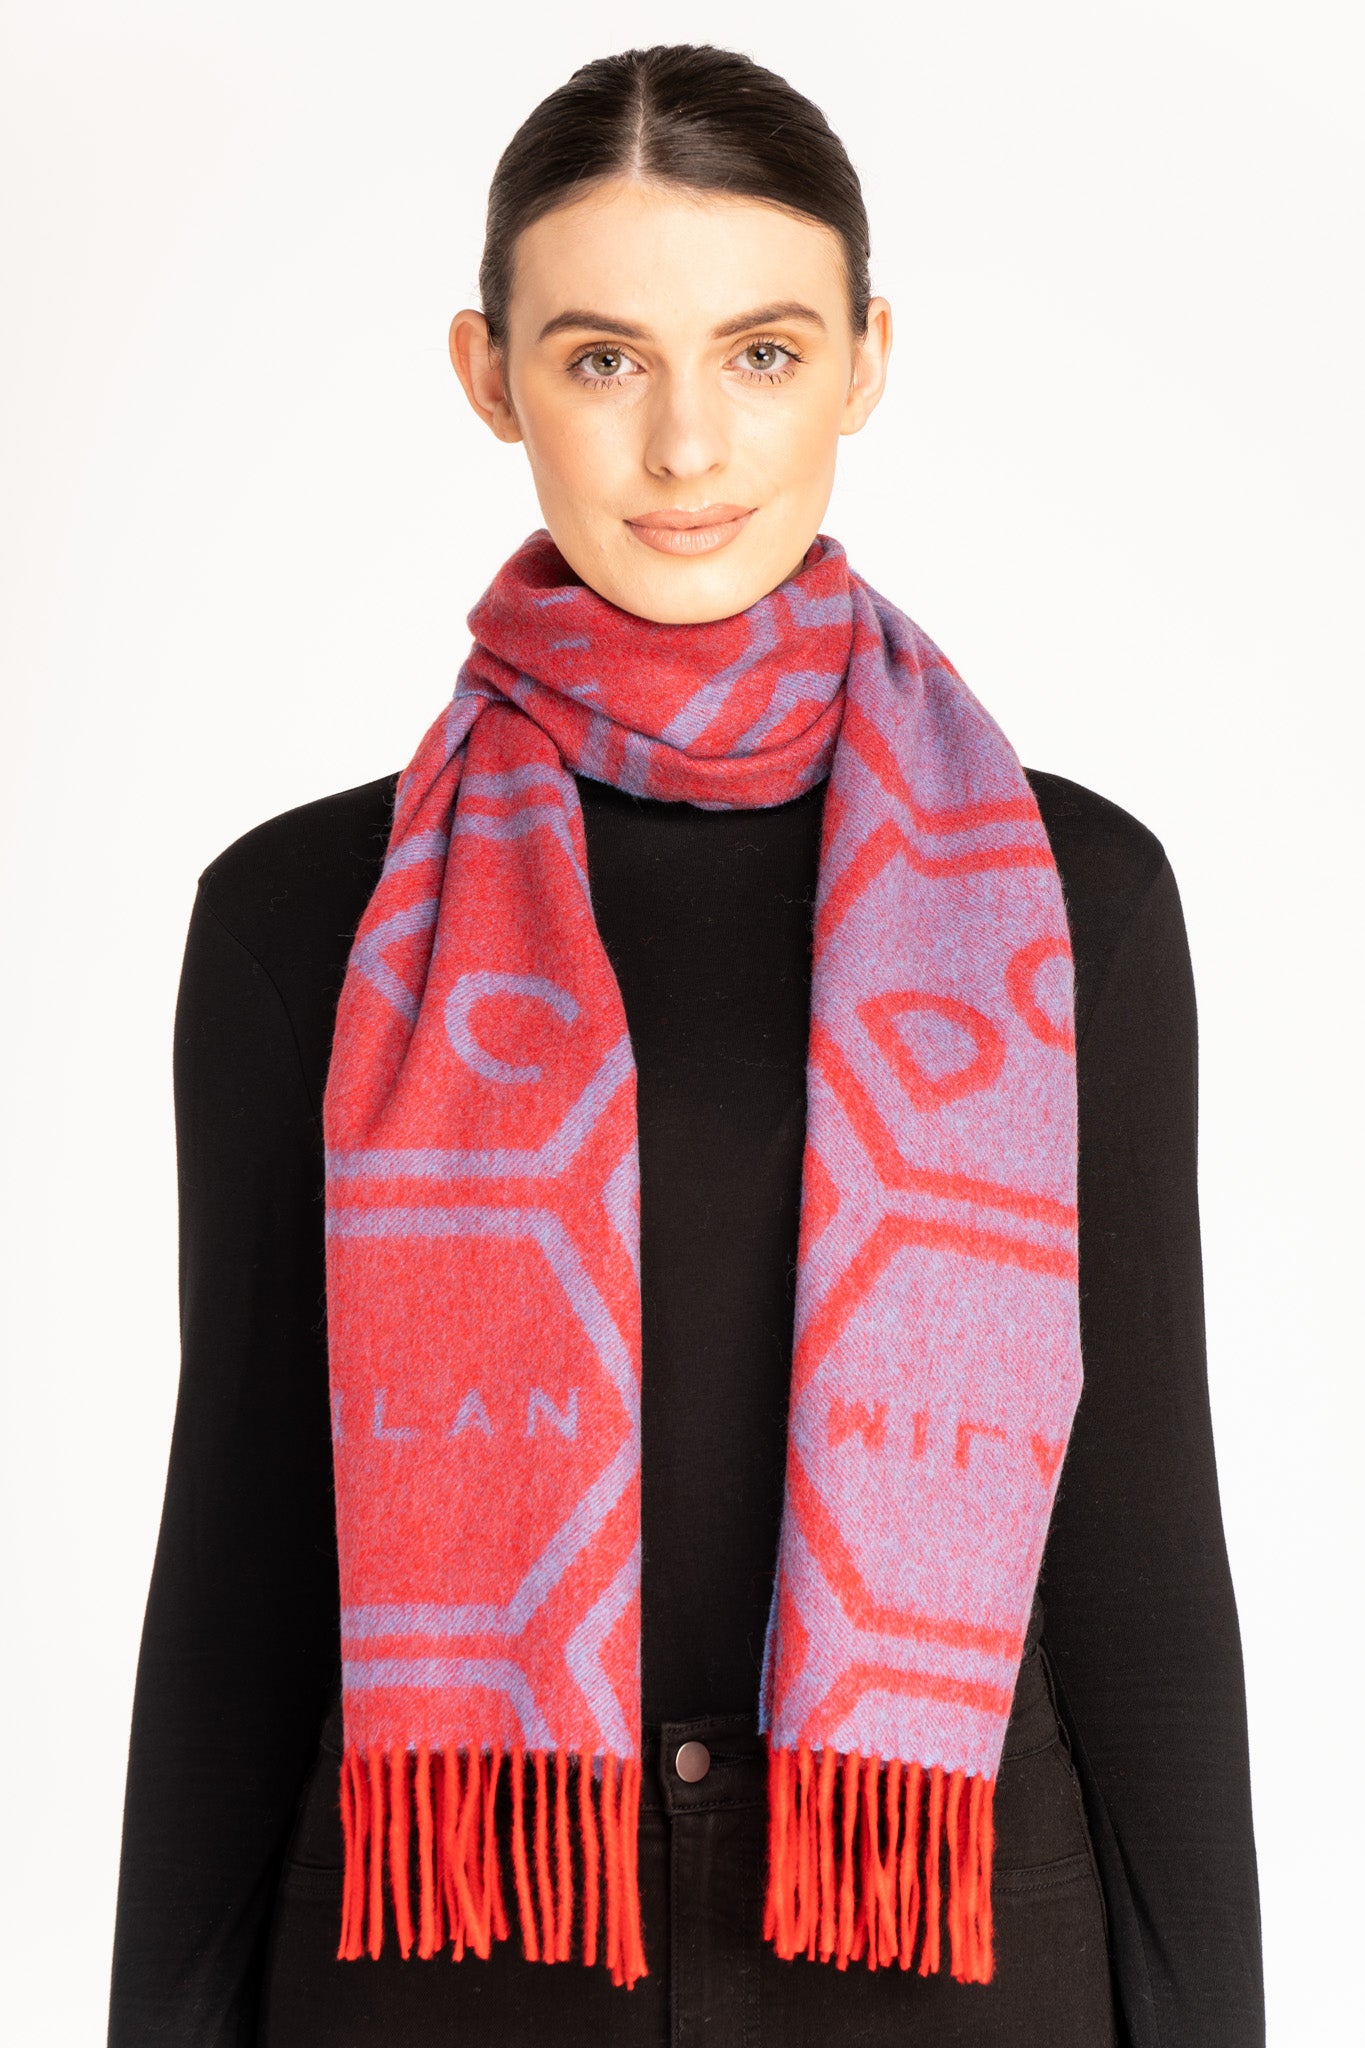 DC Monogram Red Scarf 100% Pure Lambswool